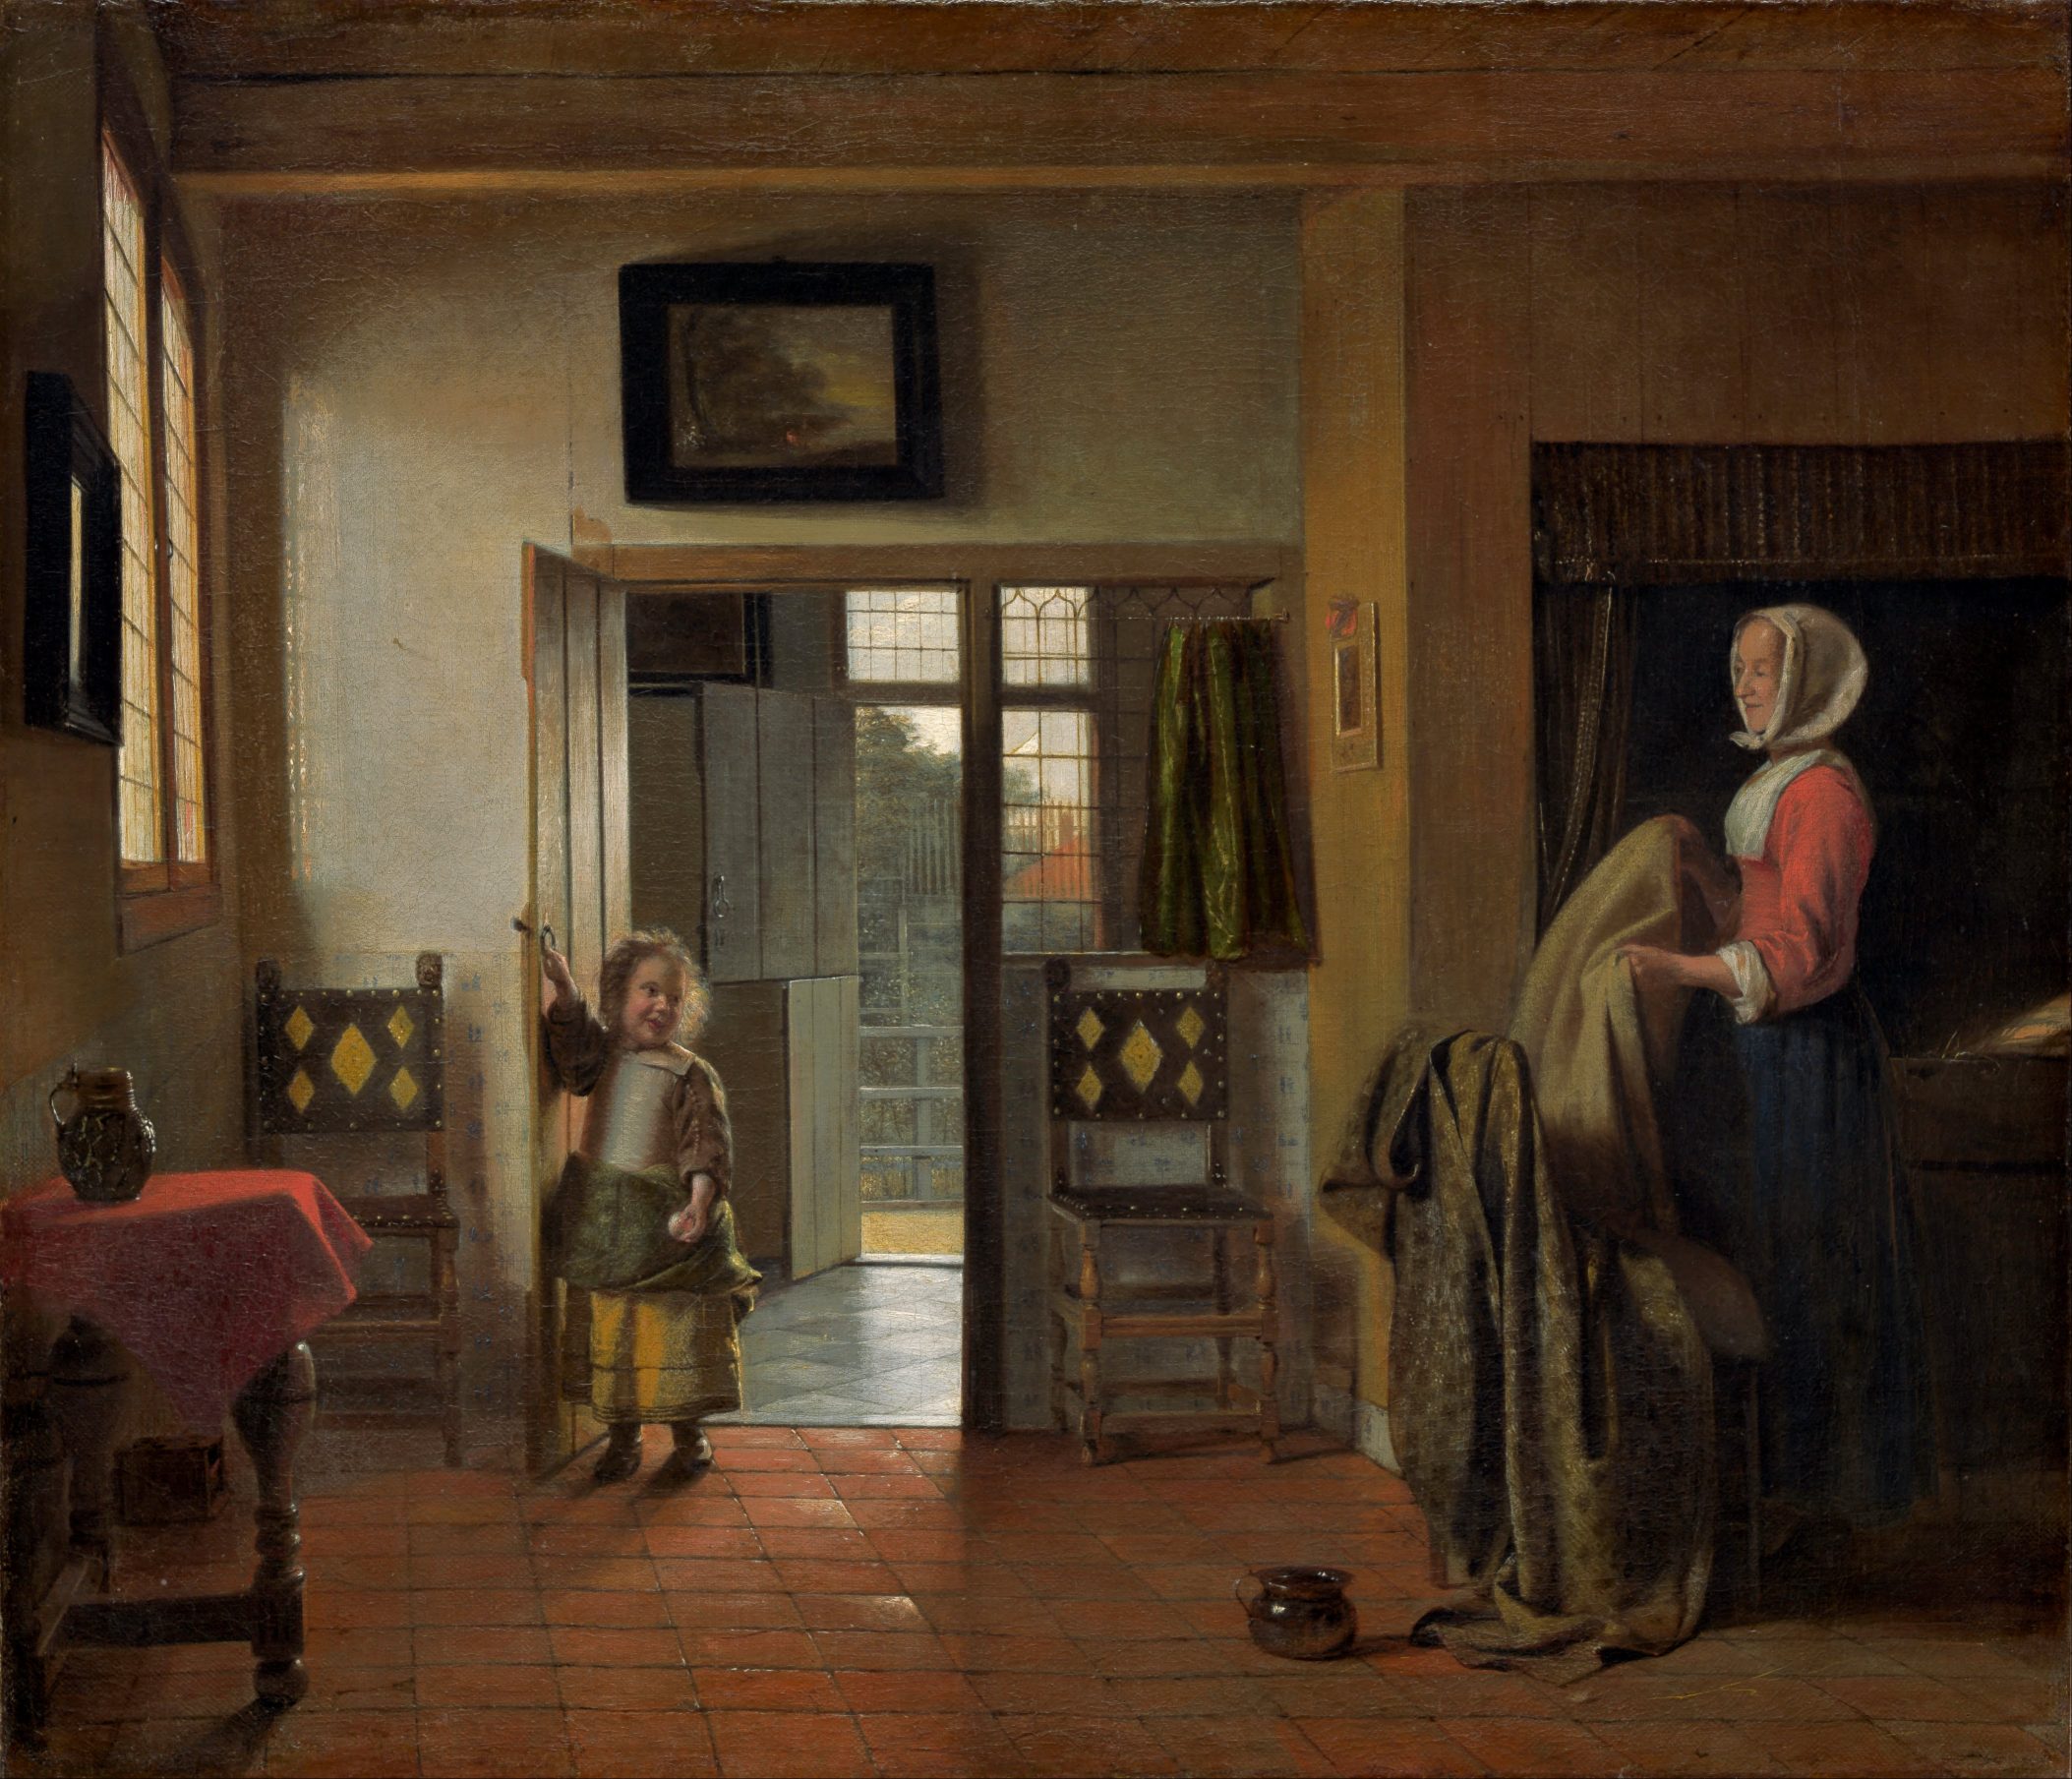 A painting of a woman and a child in a bedroom.